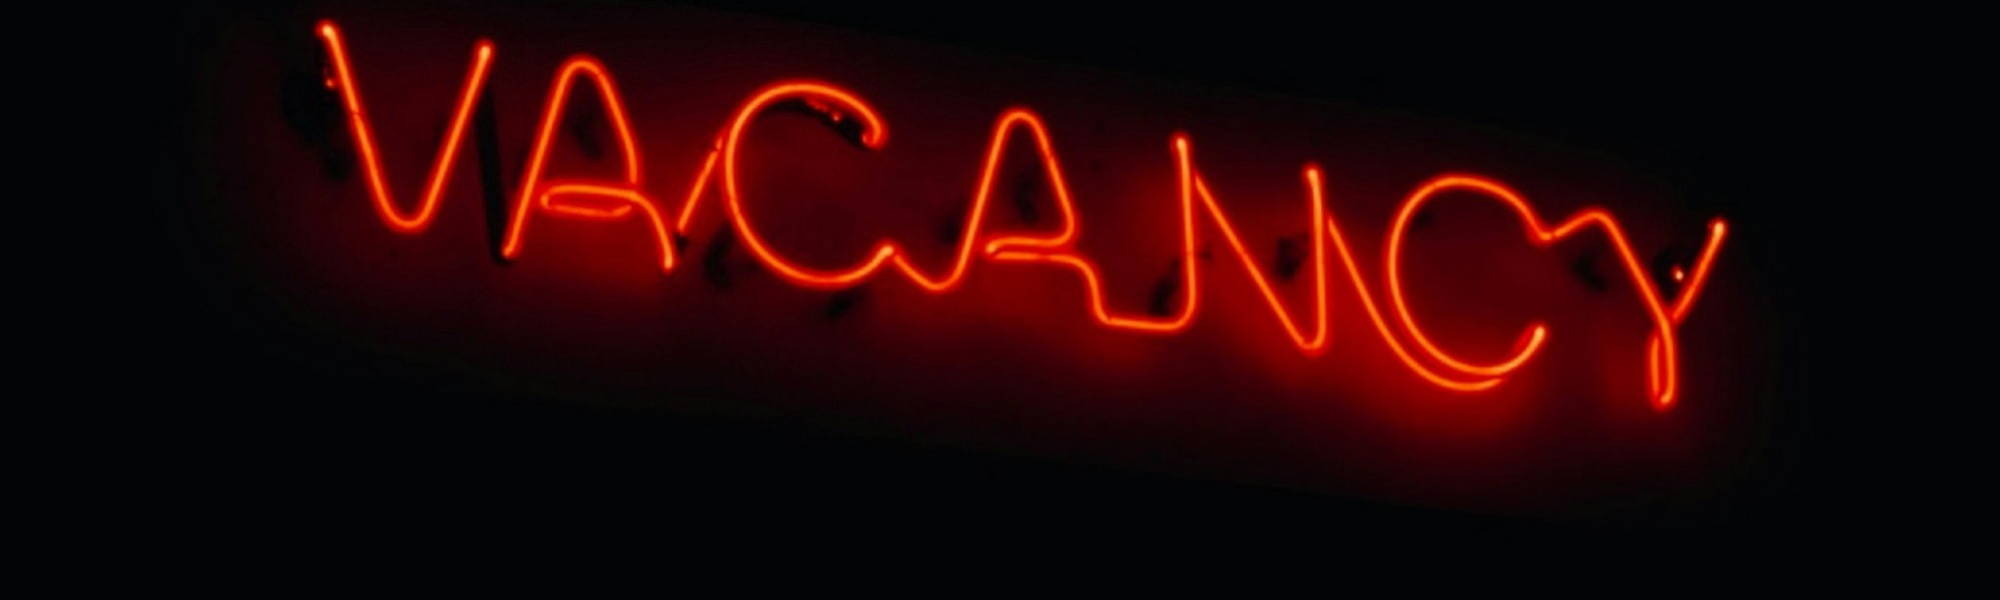 Bright neon lights form the word "Vacancy" on a sign, attracting attention.